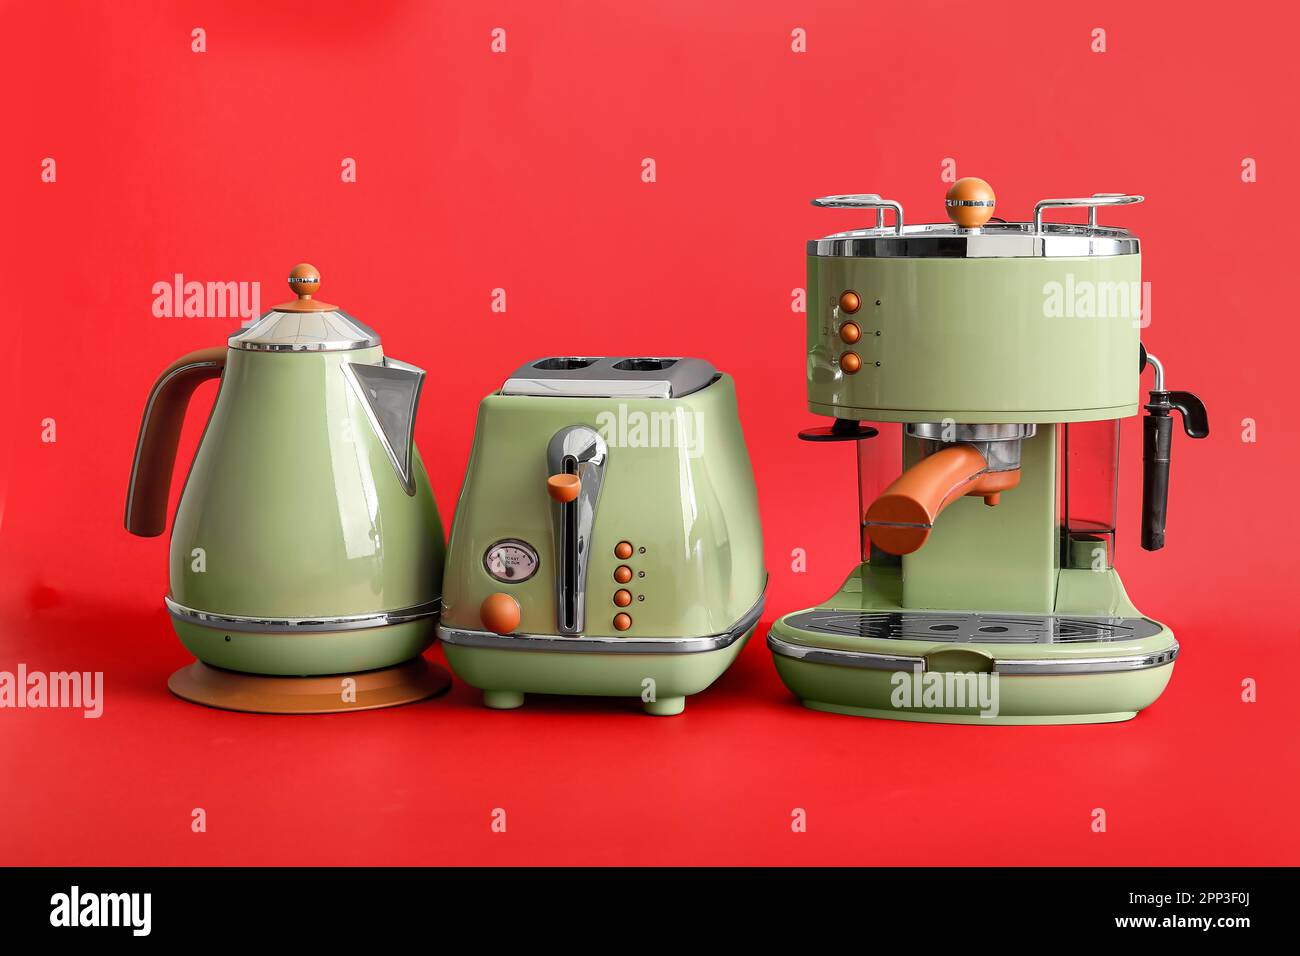 https://c8.alamy.com/comp/2PP3F0J/electric-kettle-toaster-and-coffee-machine-on-red-background-2PP3F0J.jpg